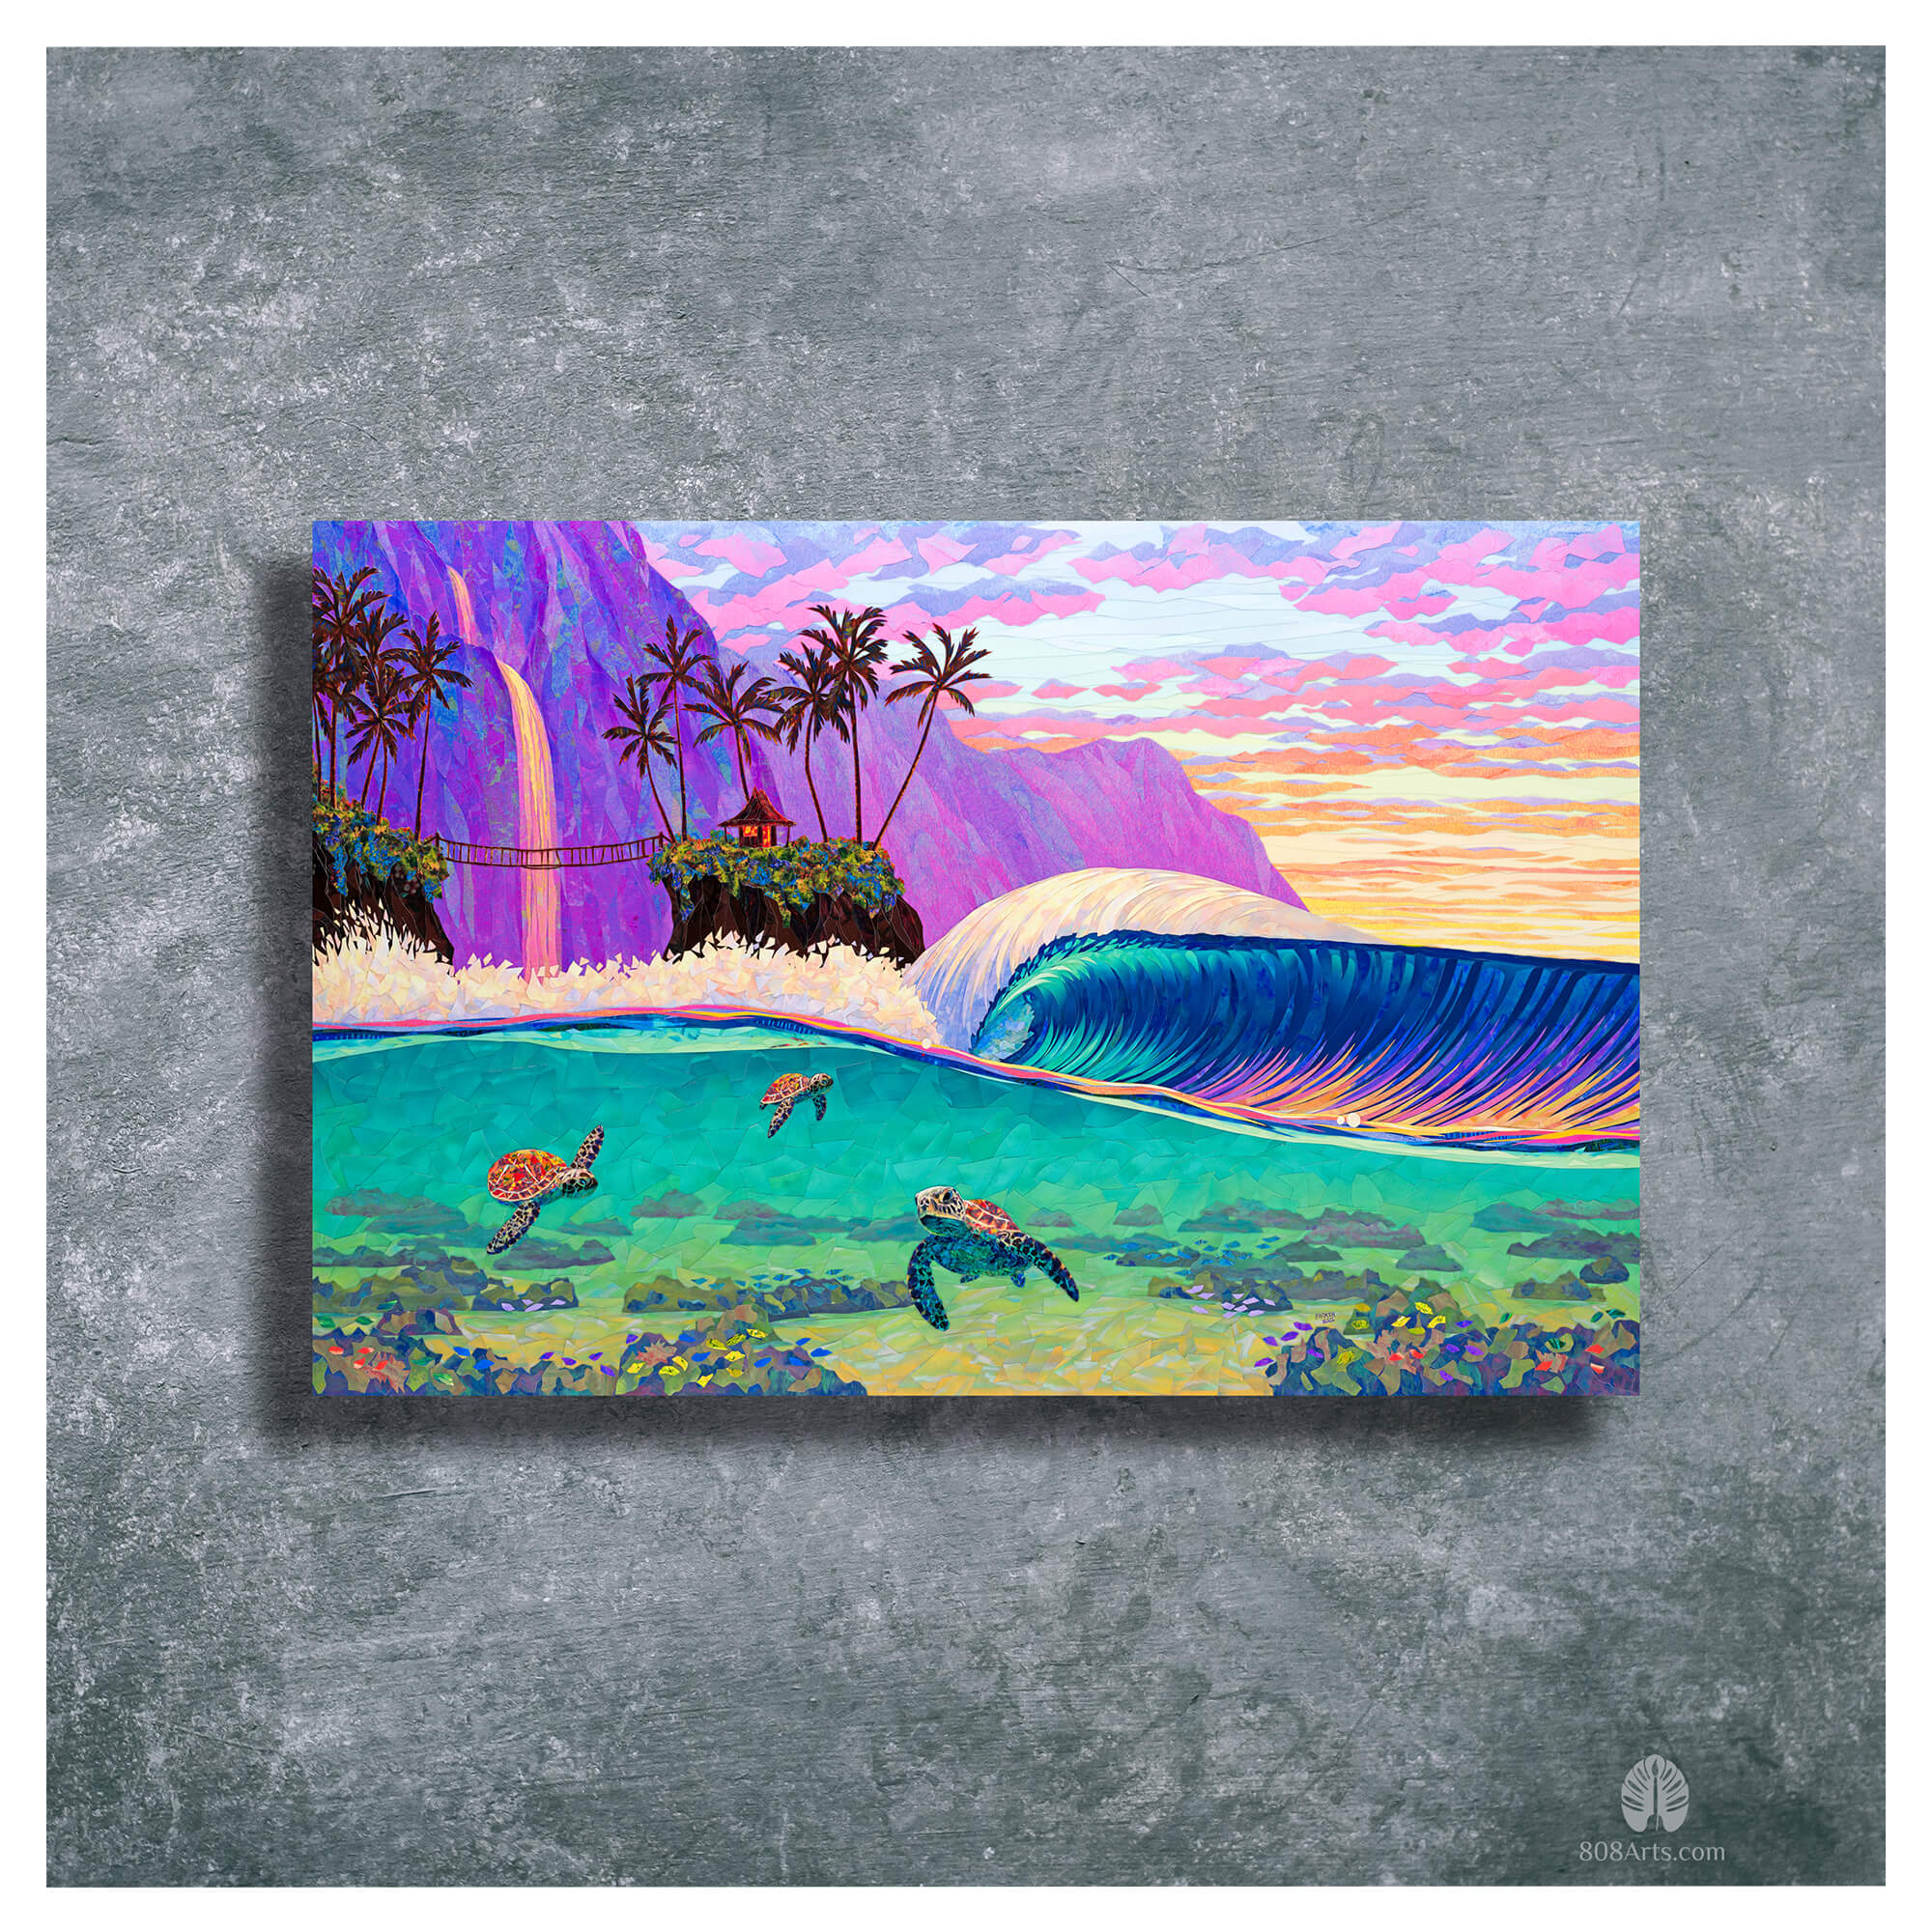 A metal art print featuring a collage of a stunning seascape with three sea turtles, a hut on an island, and a colorful mountain with a waterfall background, by Maui artist Patrick Parker